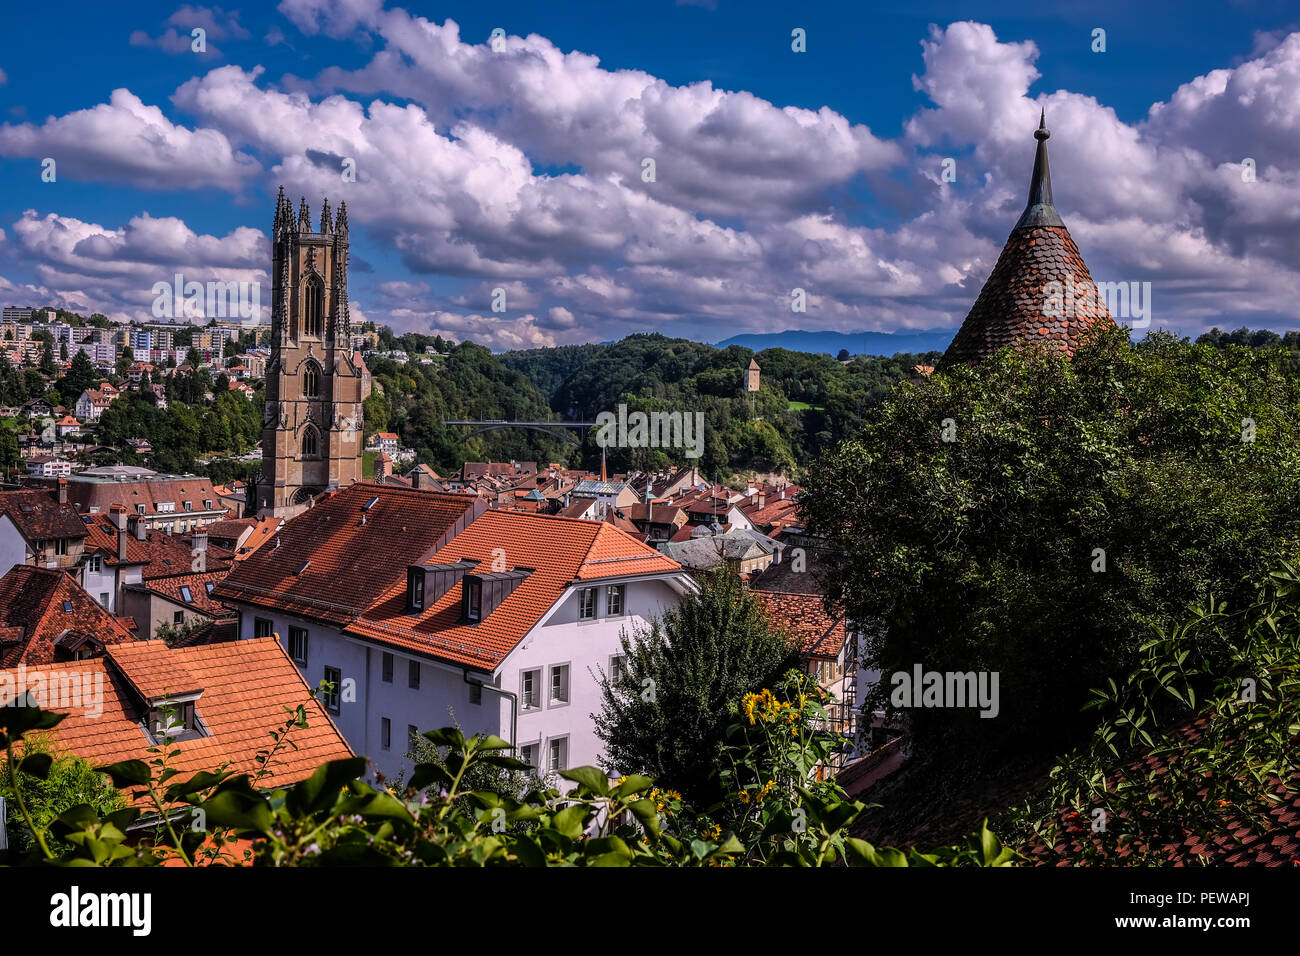 Landscape view of the city of Fribourg, in Switzerland with the Saint-Nicolas cathedral in the center and the Schönberg area in the background Stock Photo